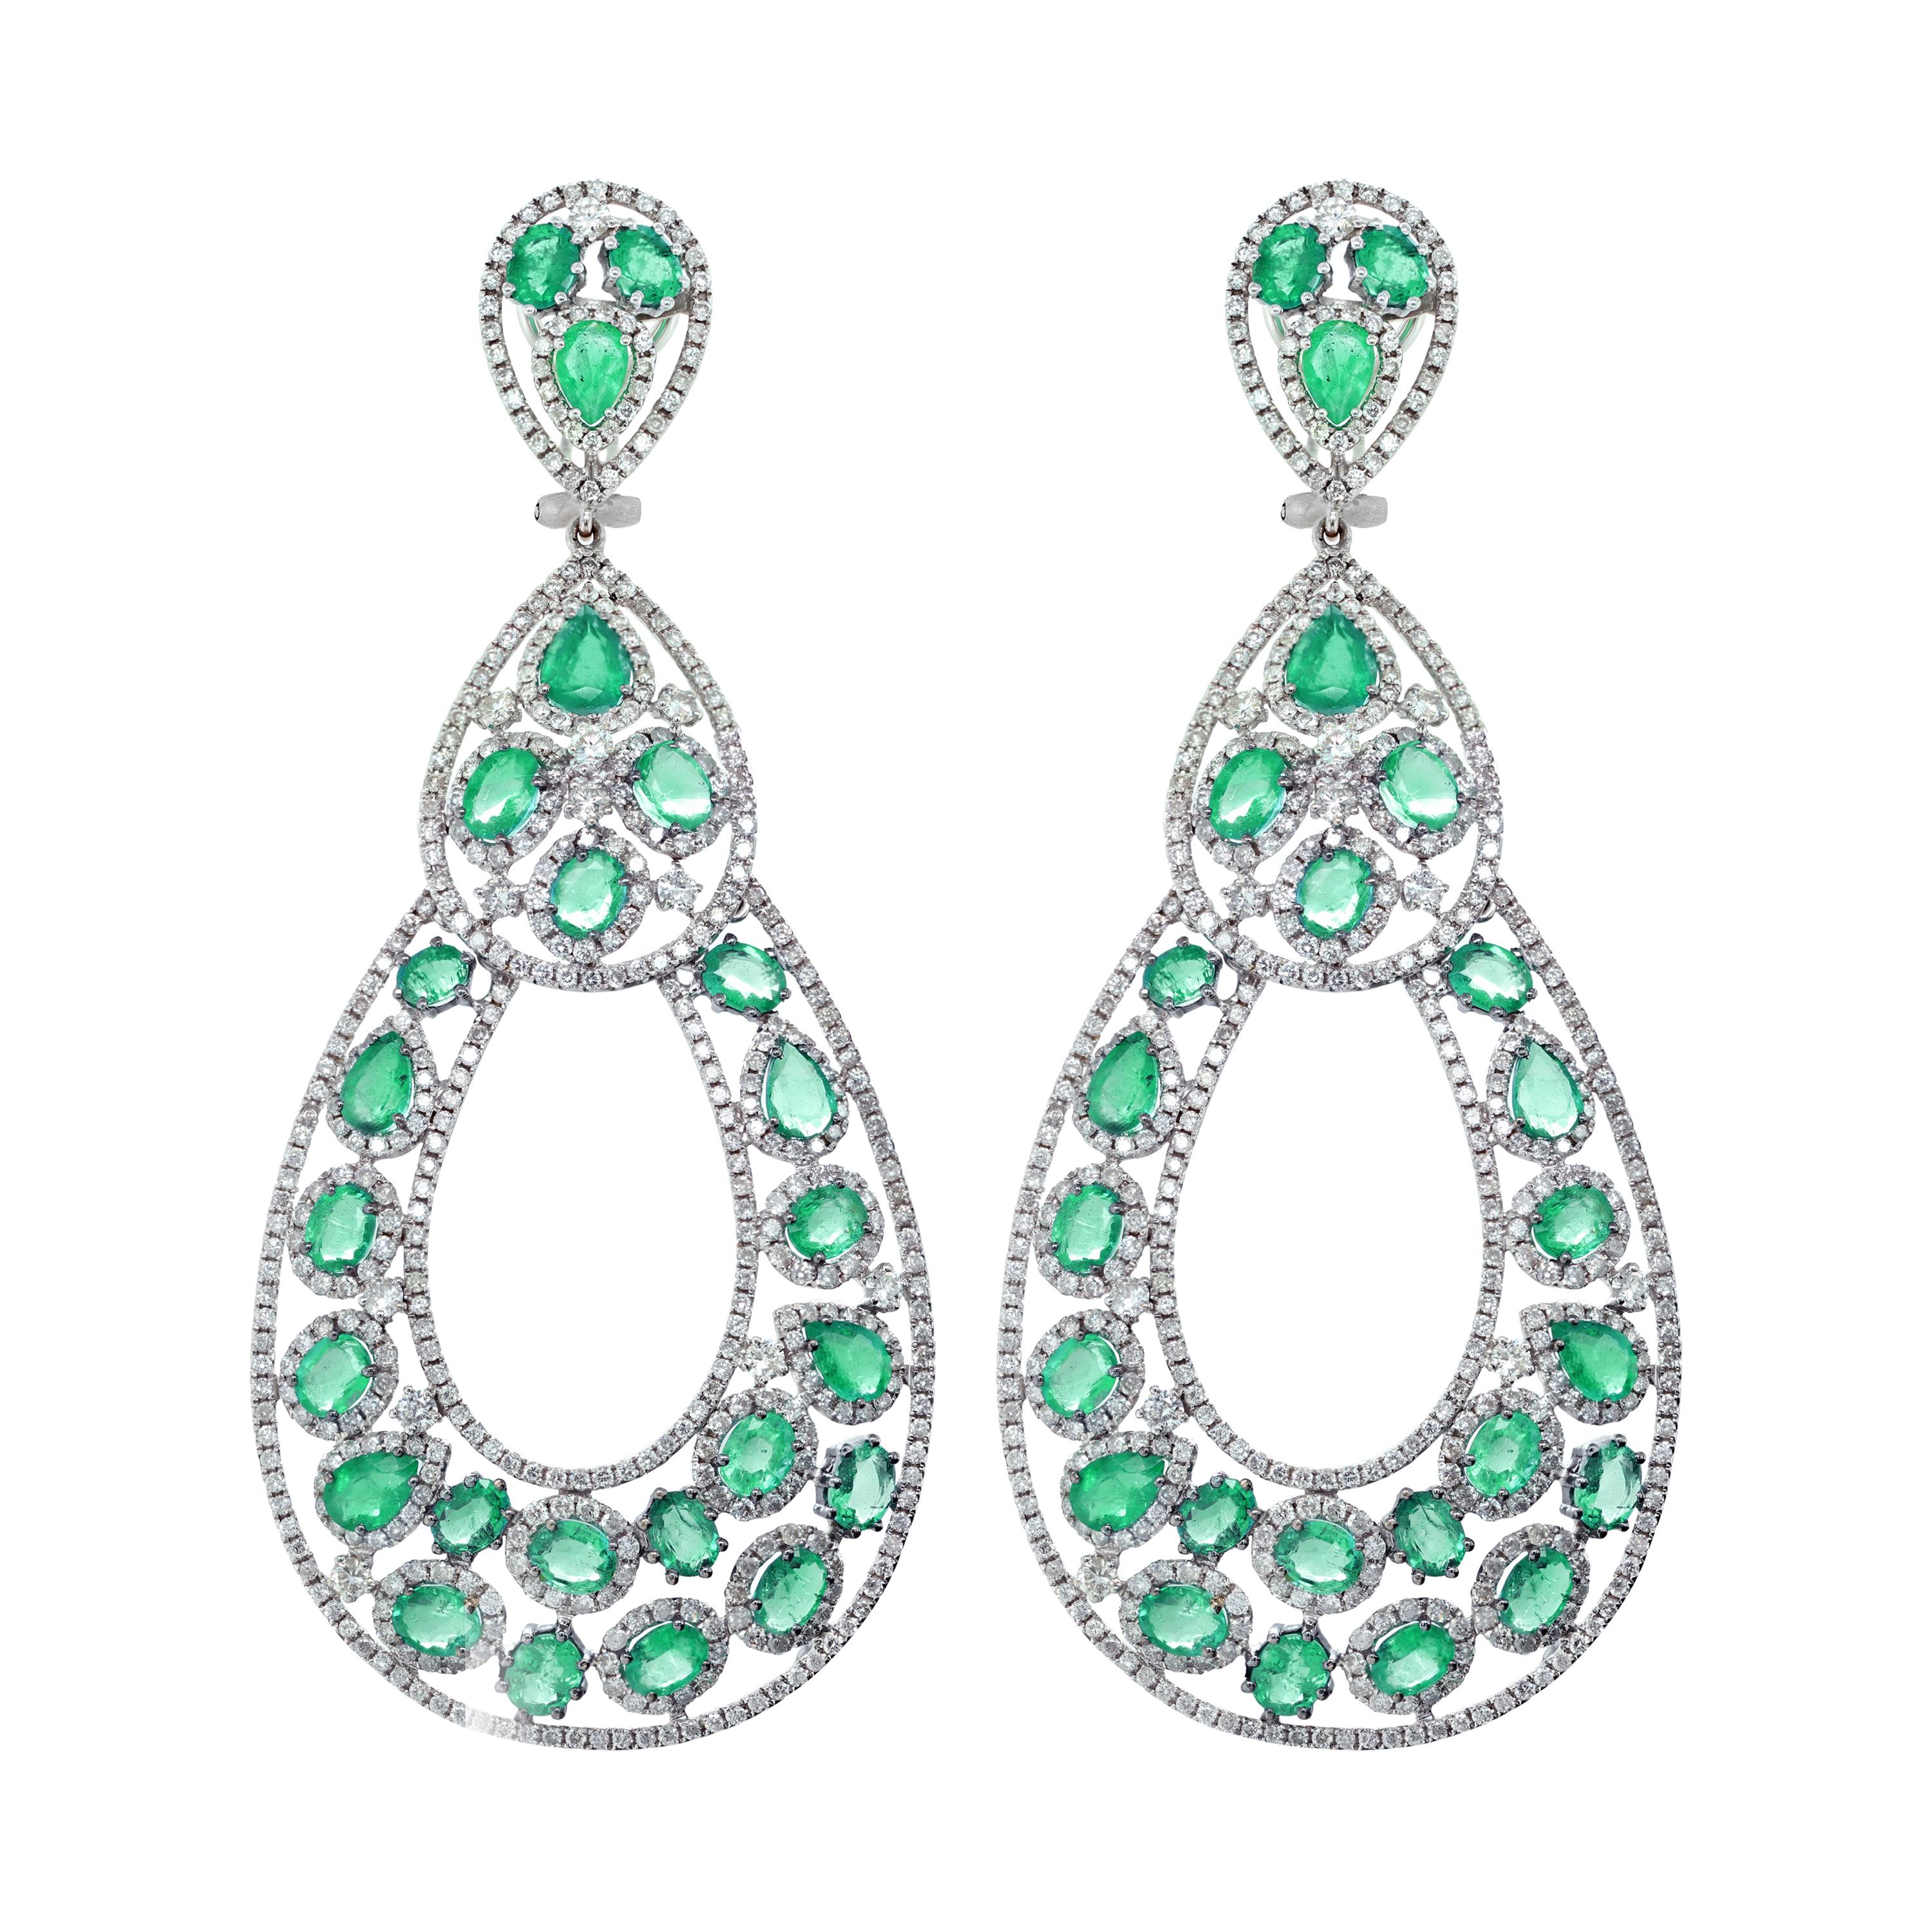 Diana M. 18k White Gold Earrings with Diamonds and 18.40 Carats Green Emeralds For Sale